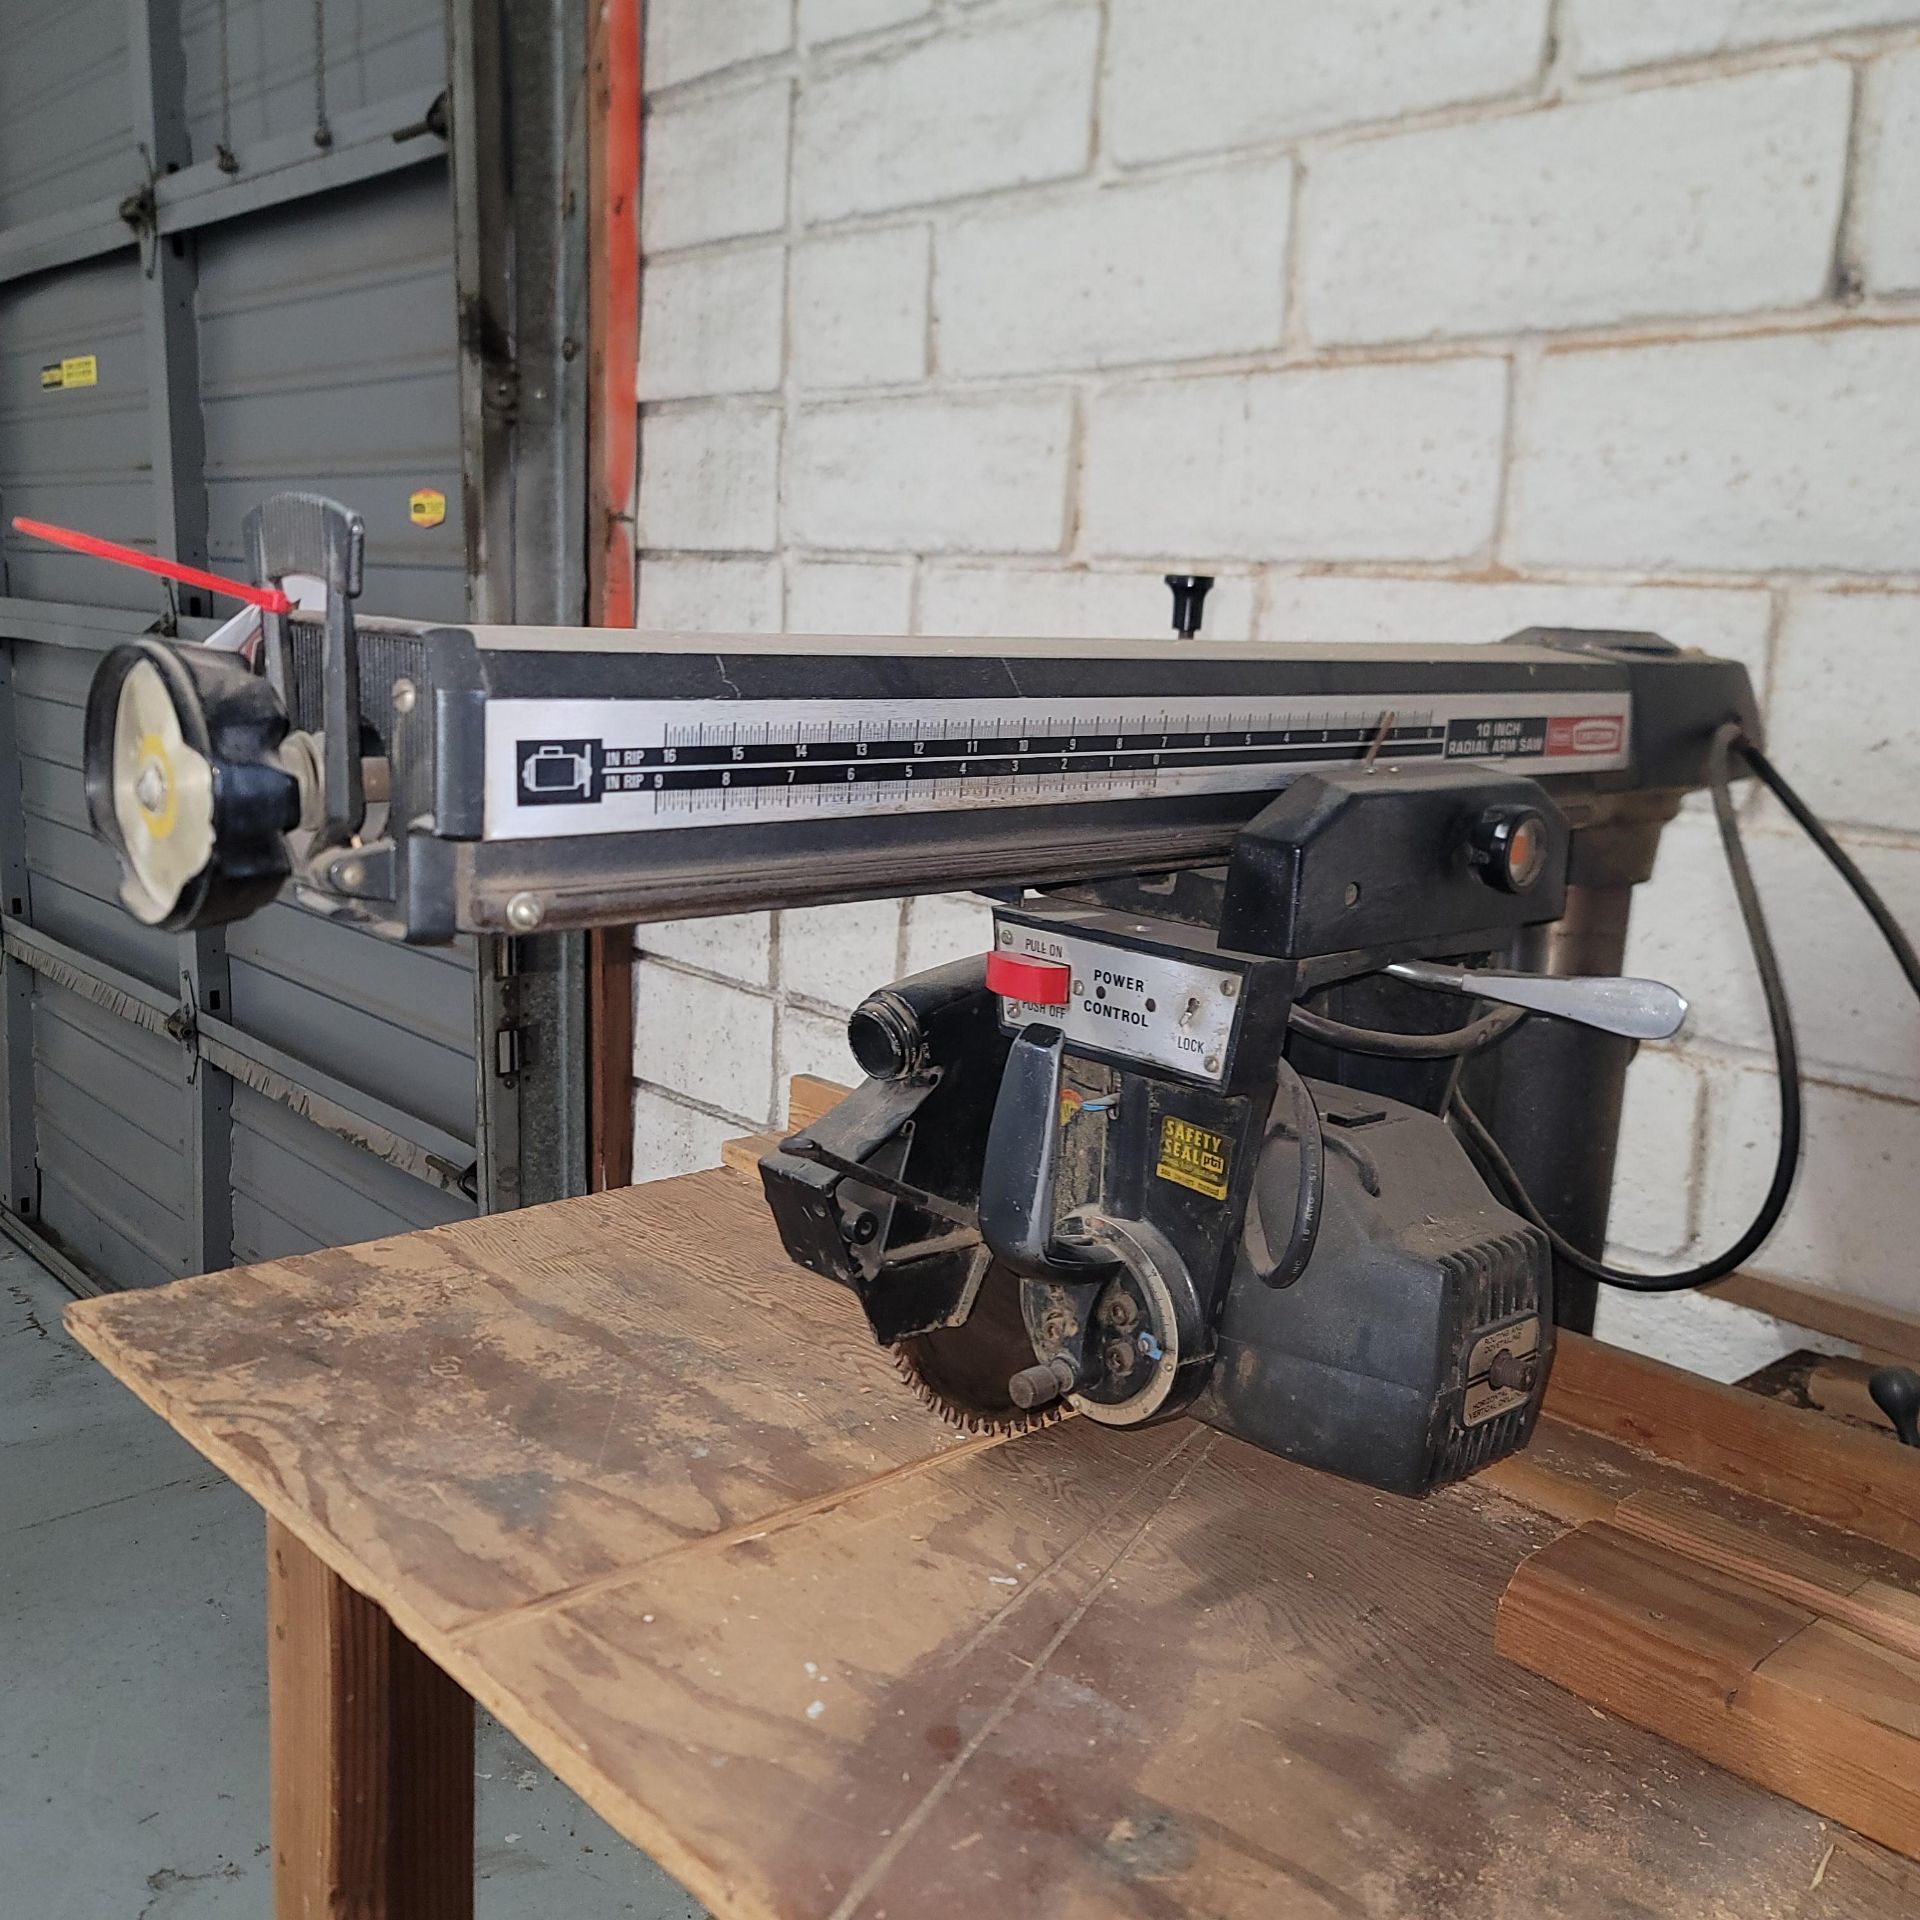 SEARS CRAFTSMAN 10" RADIAL ARM SAW, W/ BENCH AND MULTIPLE BLADES - Image 3 of 4